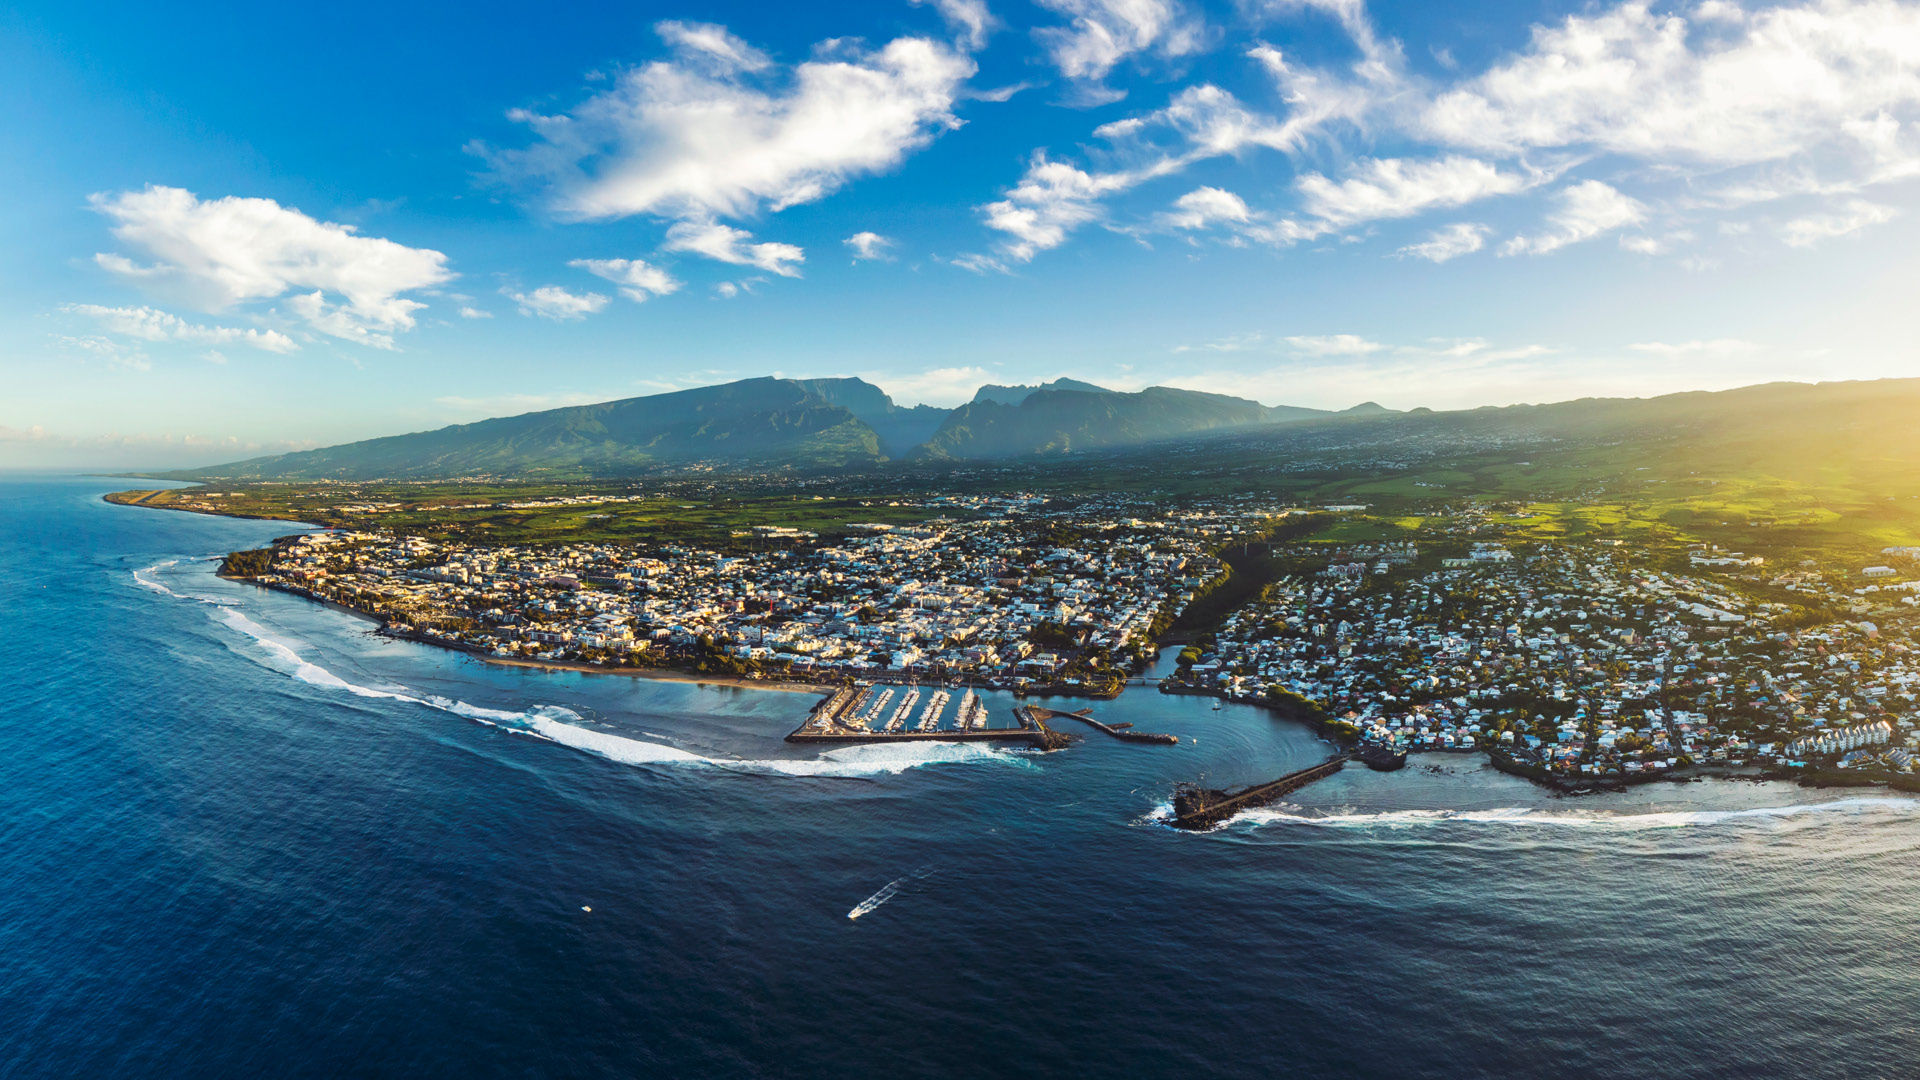 10 Reasons Why La Reunion Tops Our List of Off-Beat Destinations